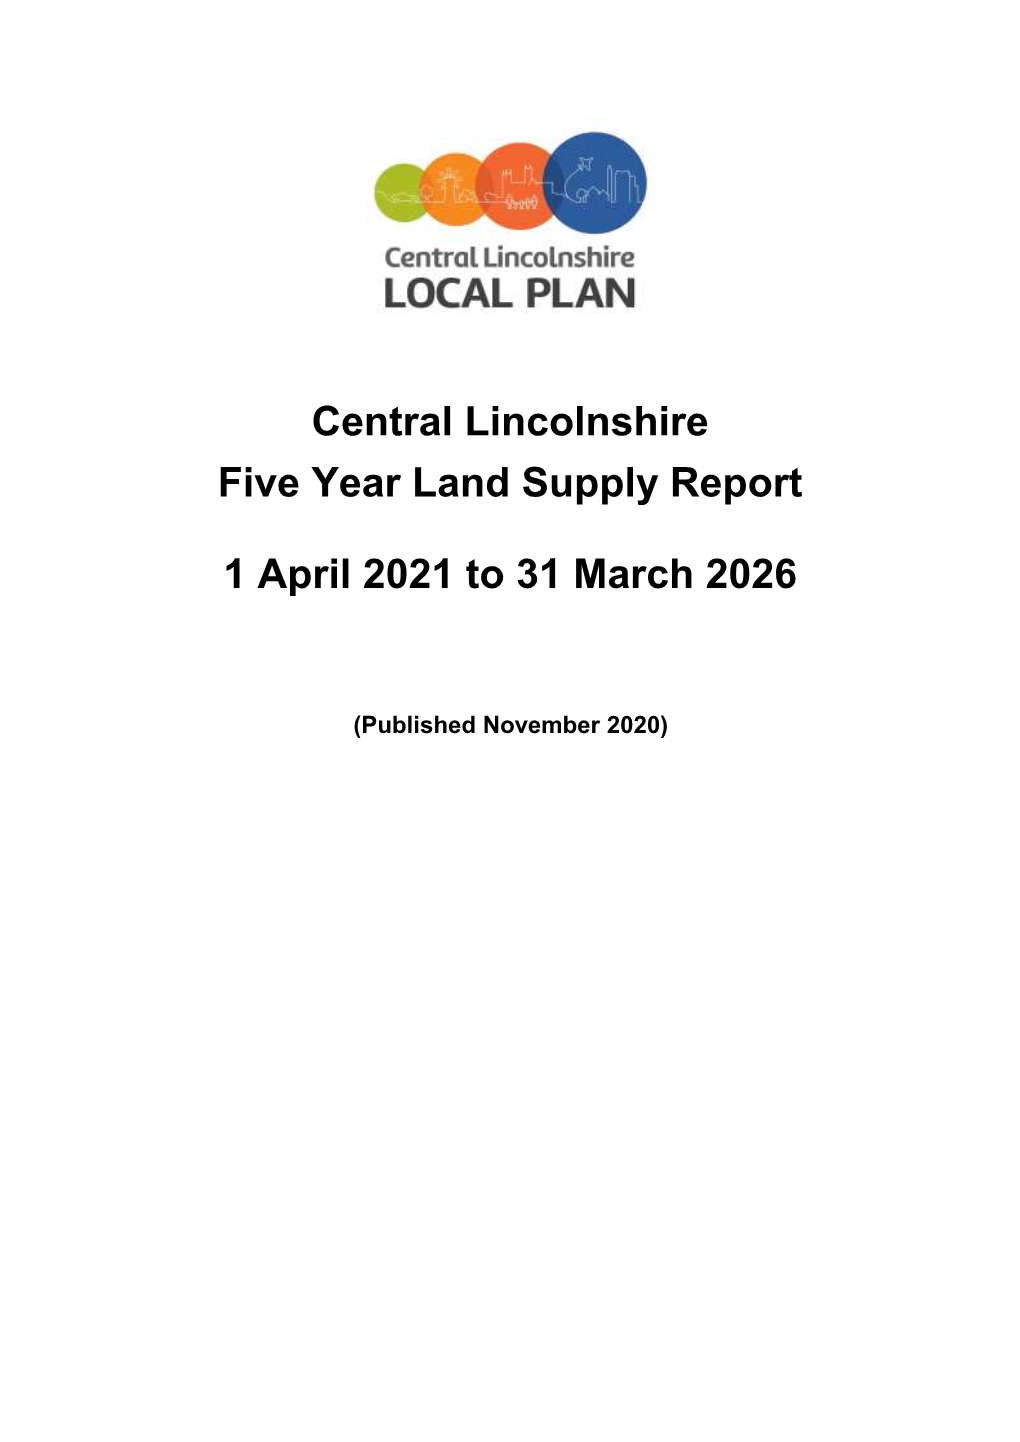 Central Lincolnshire Five Year Land Supply Report 2020